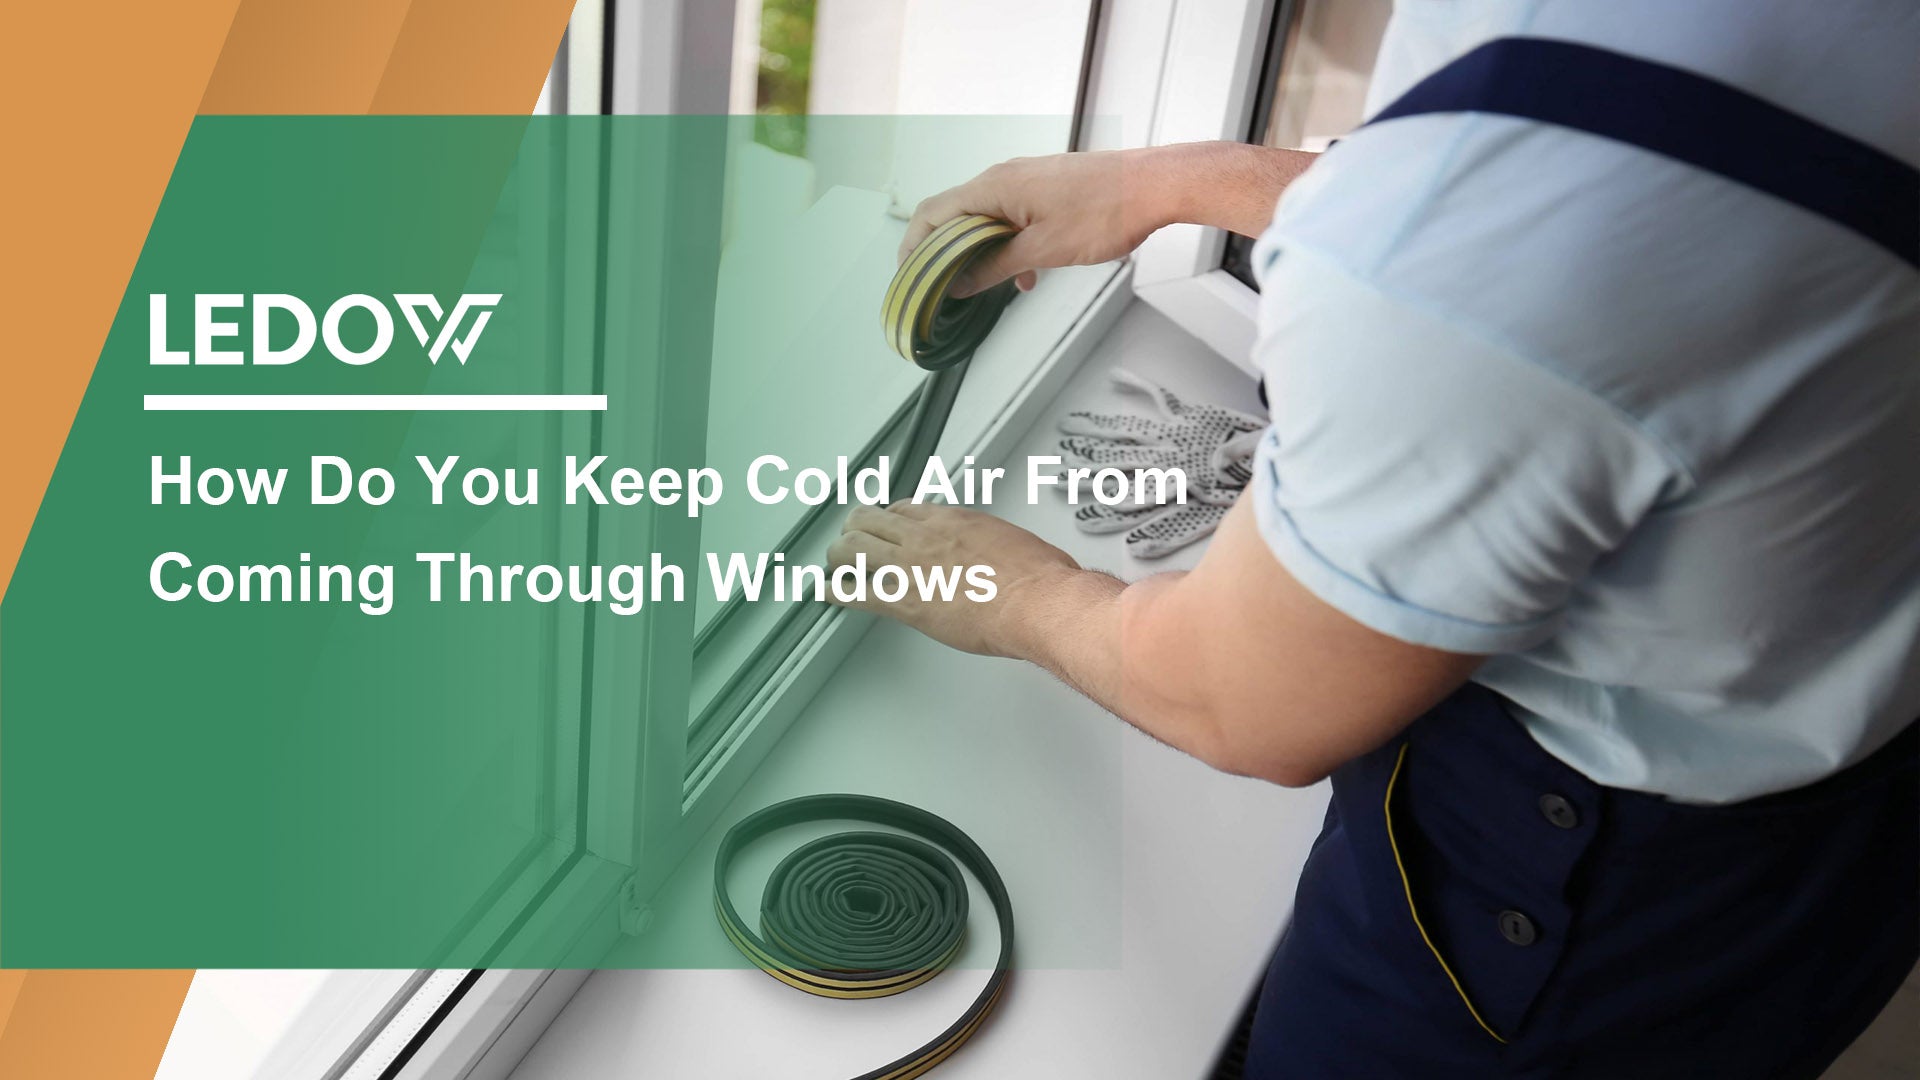 How Do You Keep Cold Air From Coming Through Windows?